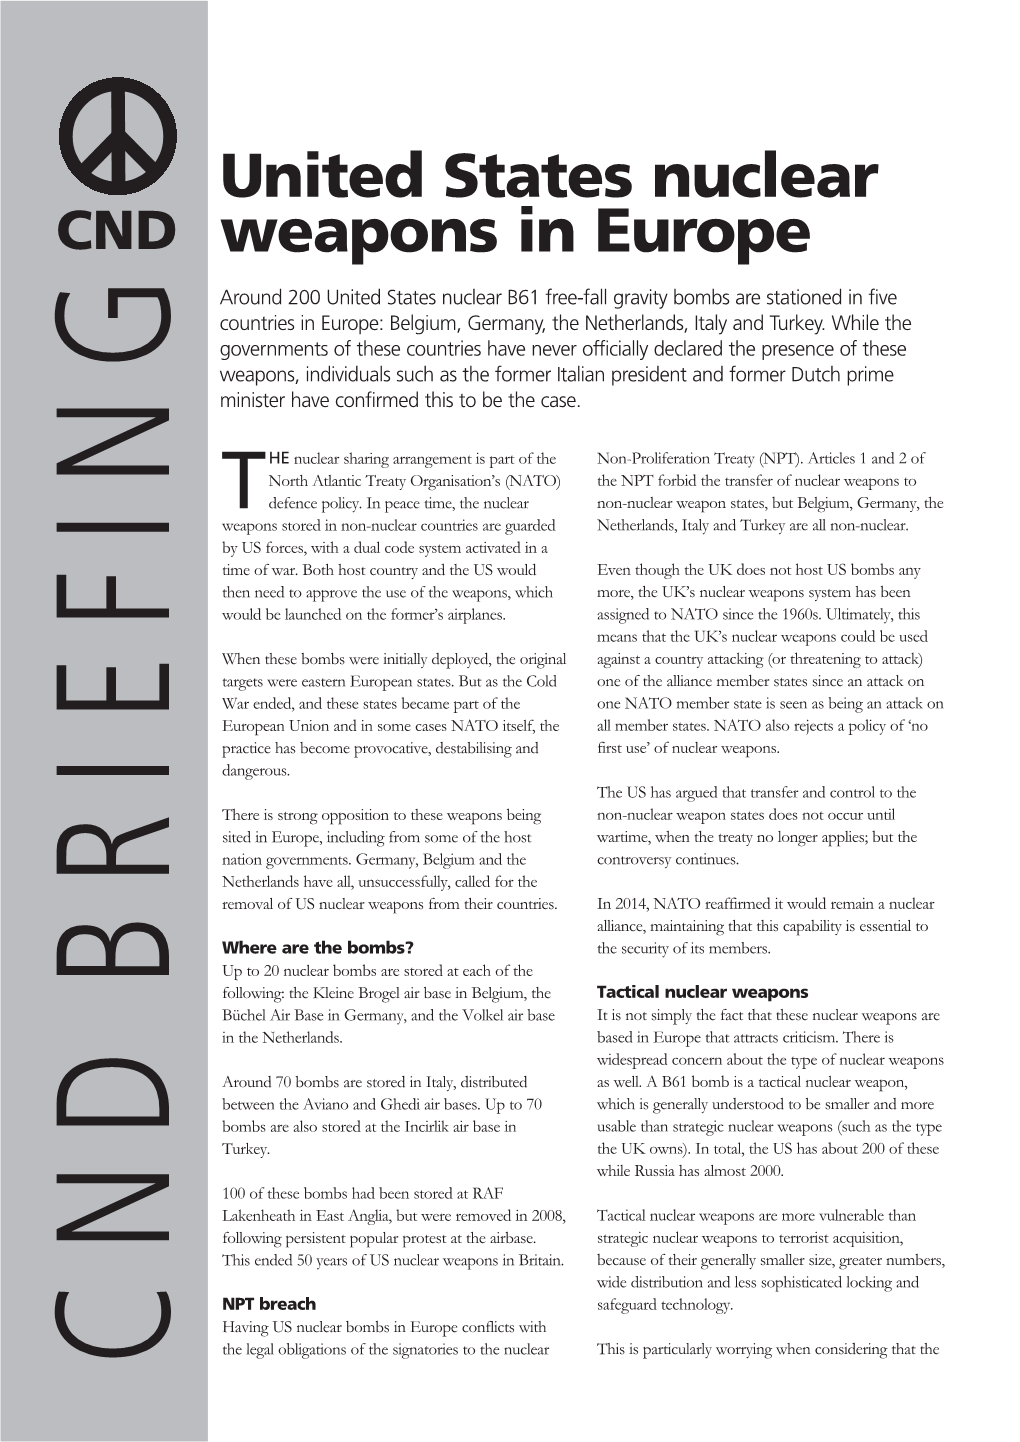 United States Nuclear Weapons in Europe